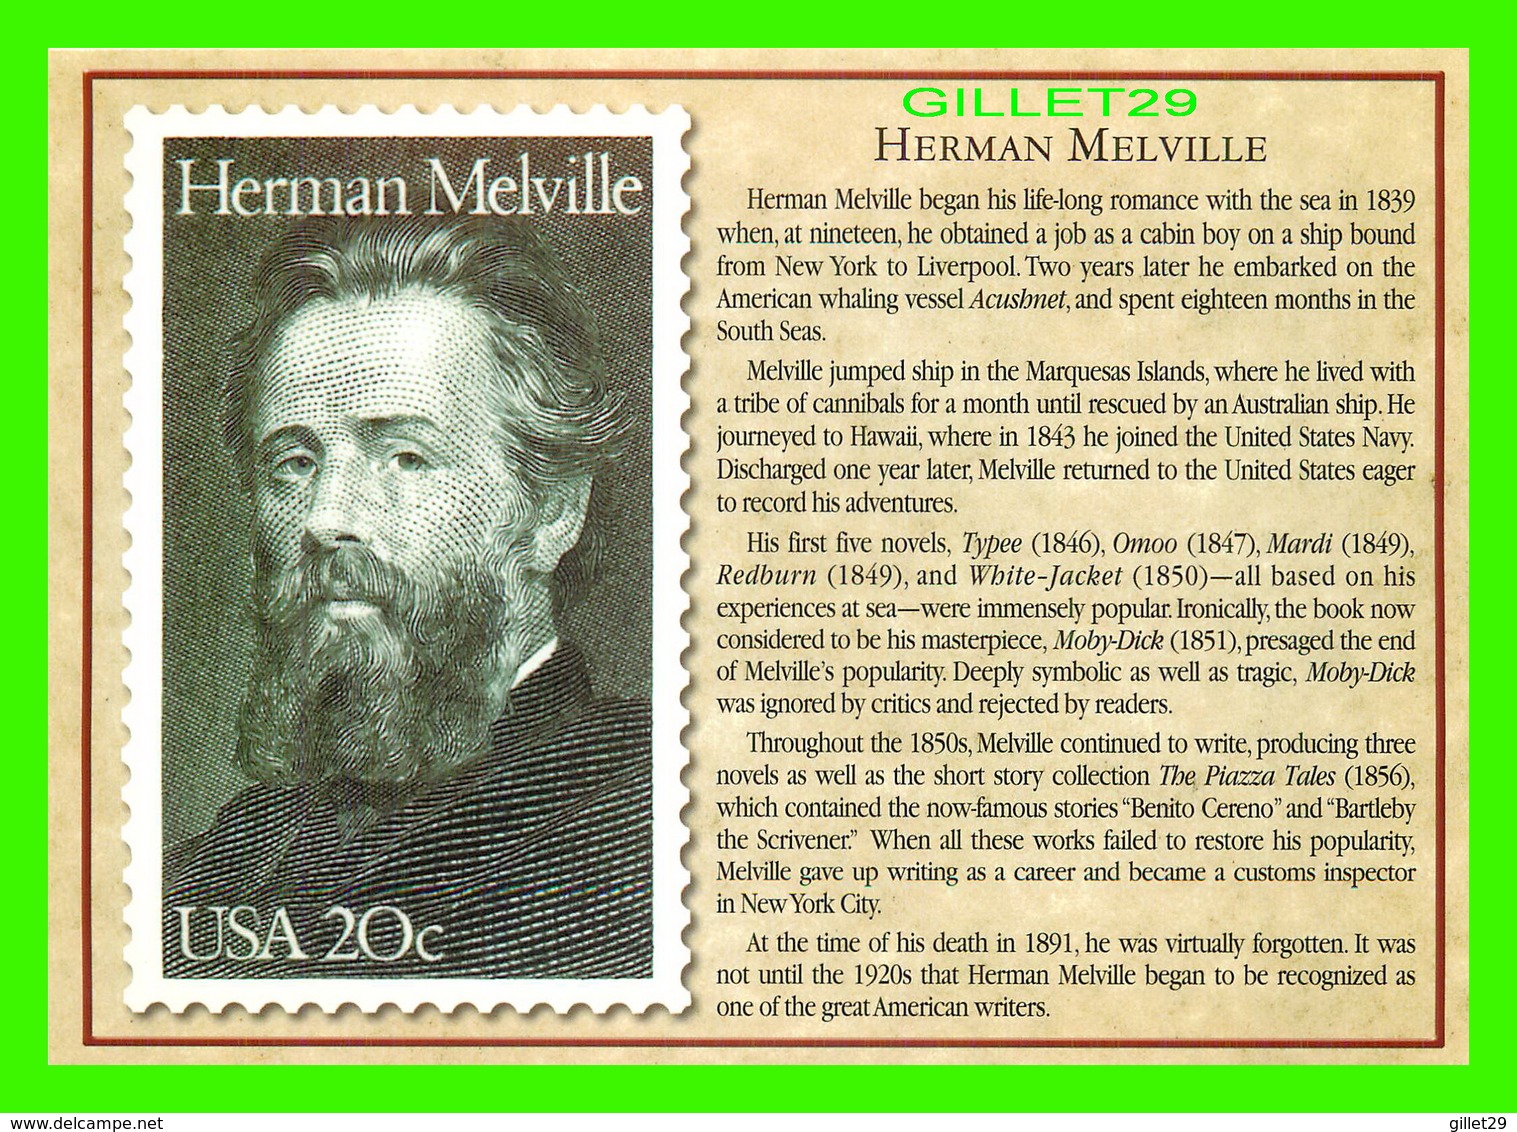 TIMBRES REPRÉSENTATIOINS - GREAT AMERICAN WRITERS, HERMAN MELVILLE (1819-1891) - STAMP ISSUE DATE,1984 - Timbres (représentations)